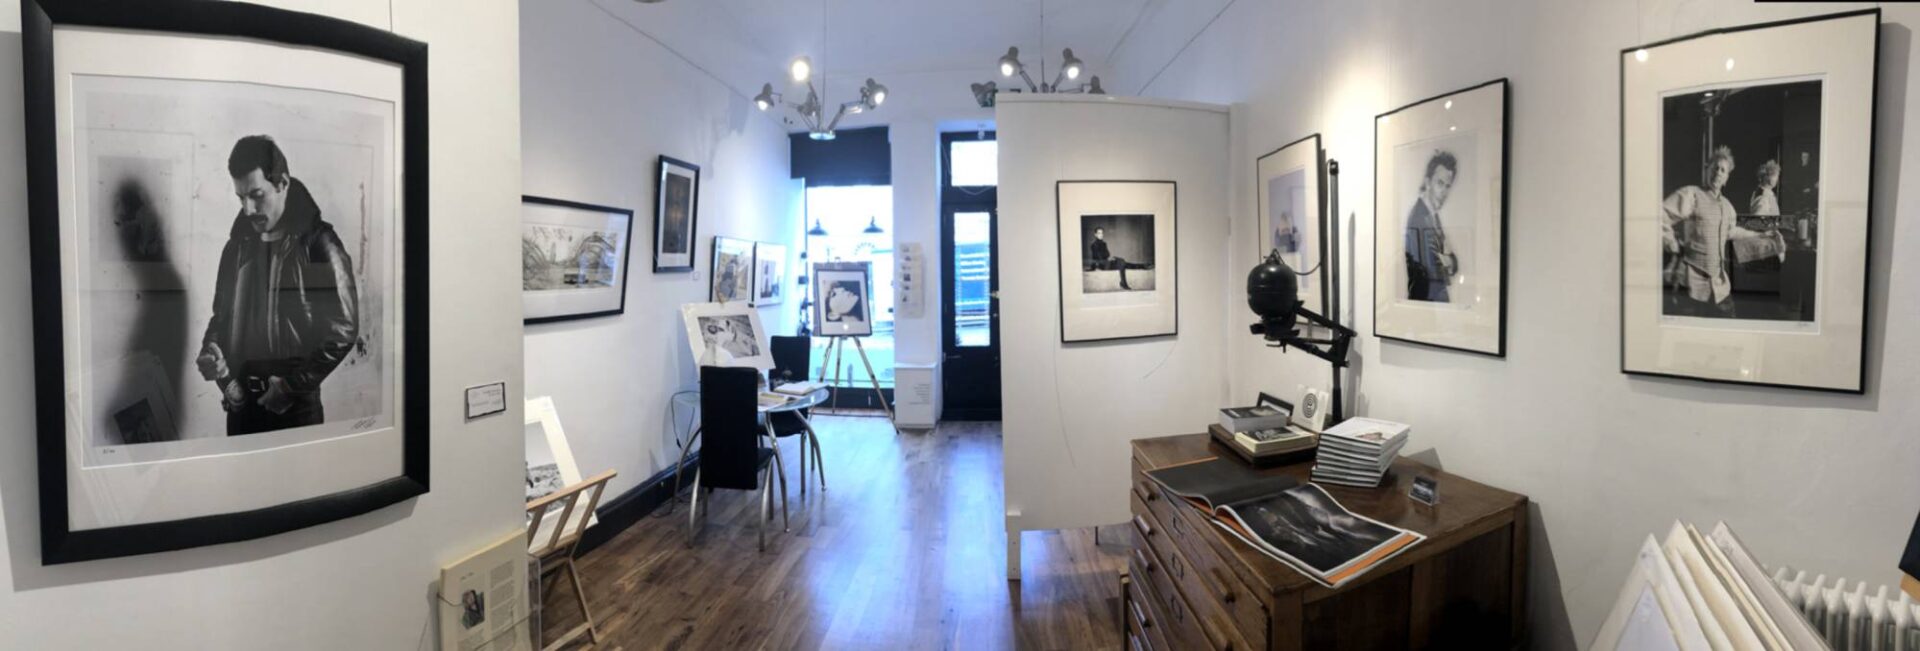 Interior of Gallery-Close Photography Gallery with pictures of rock stars,© Chris Close